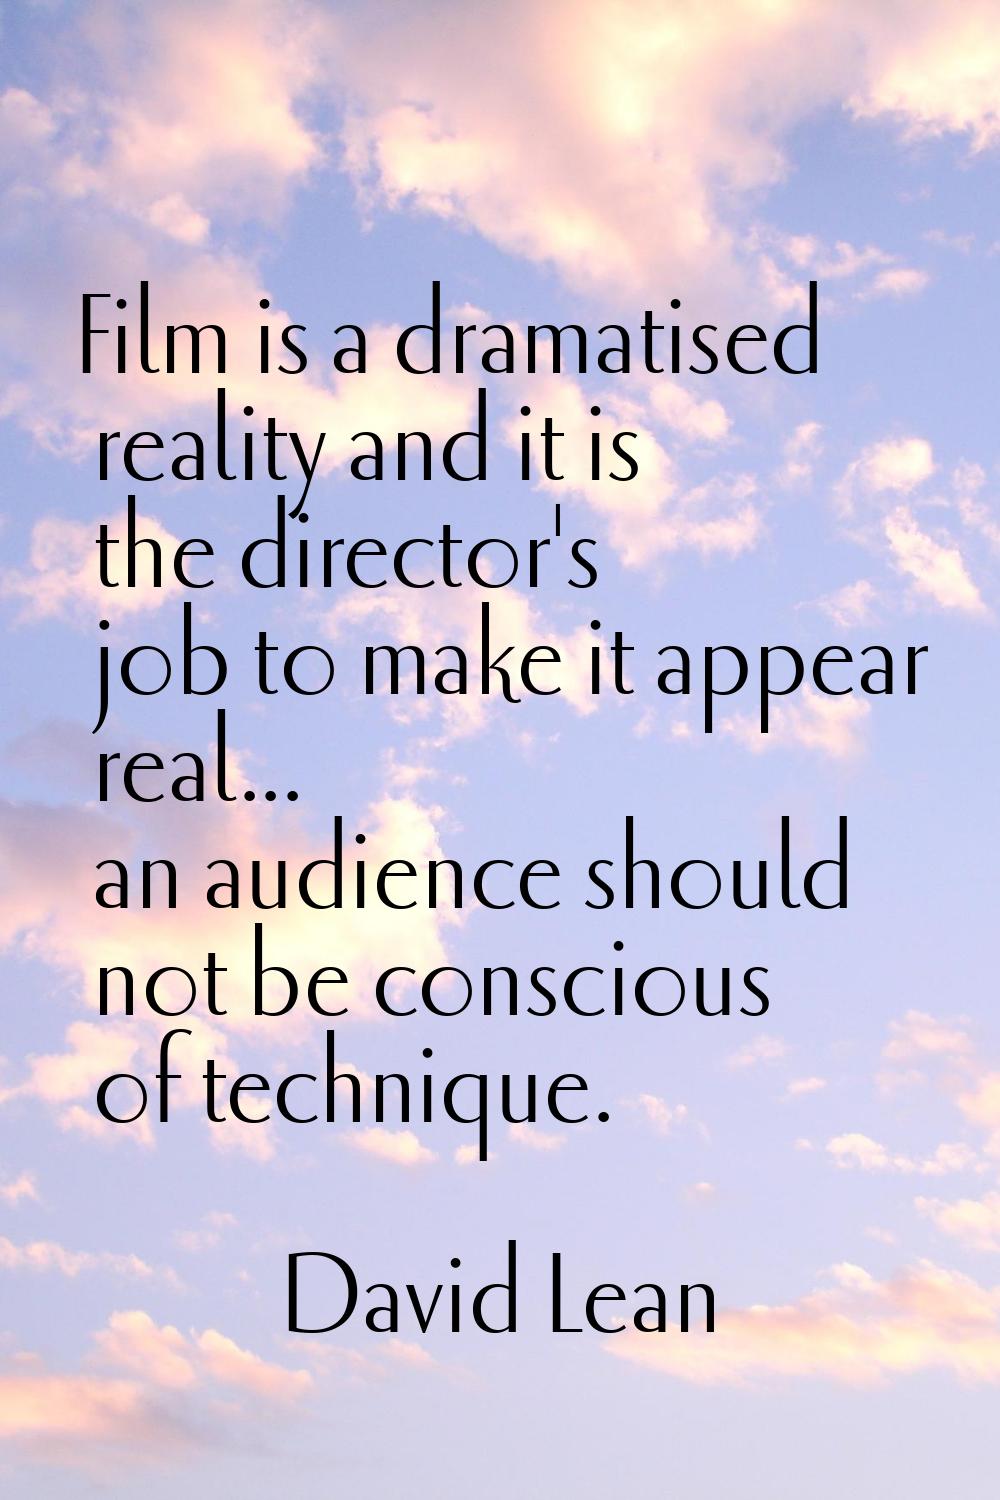 Film is a dramatised reality and it is the director's job to make it appear real... an audience sho